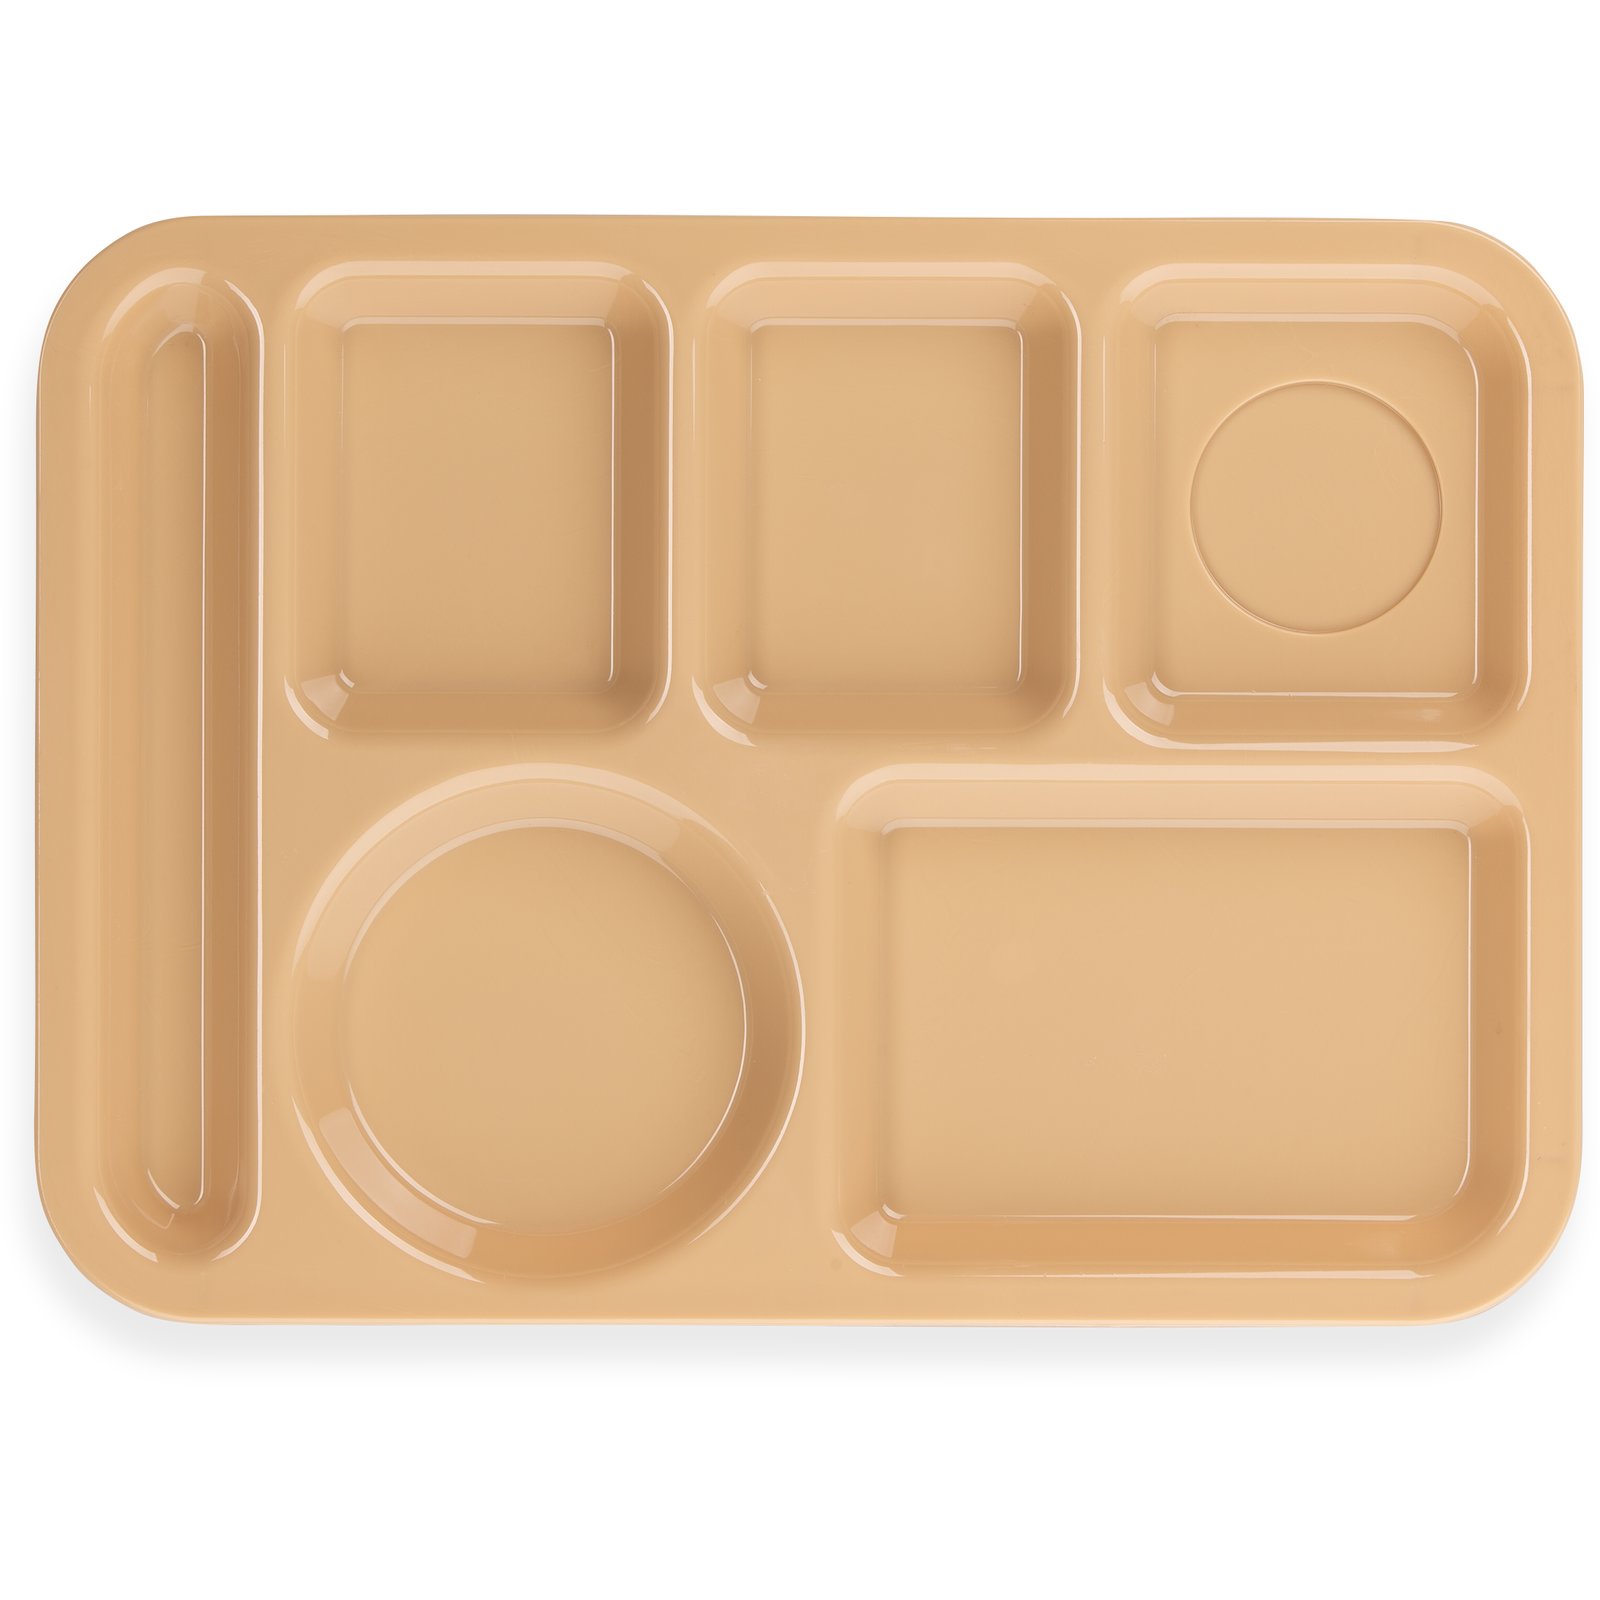 8.5 x 10.5 5-Compartment Heavyweight Lunch Trays